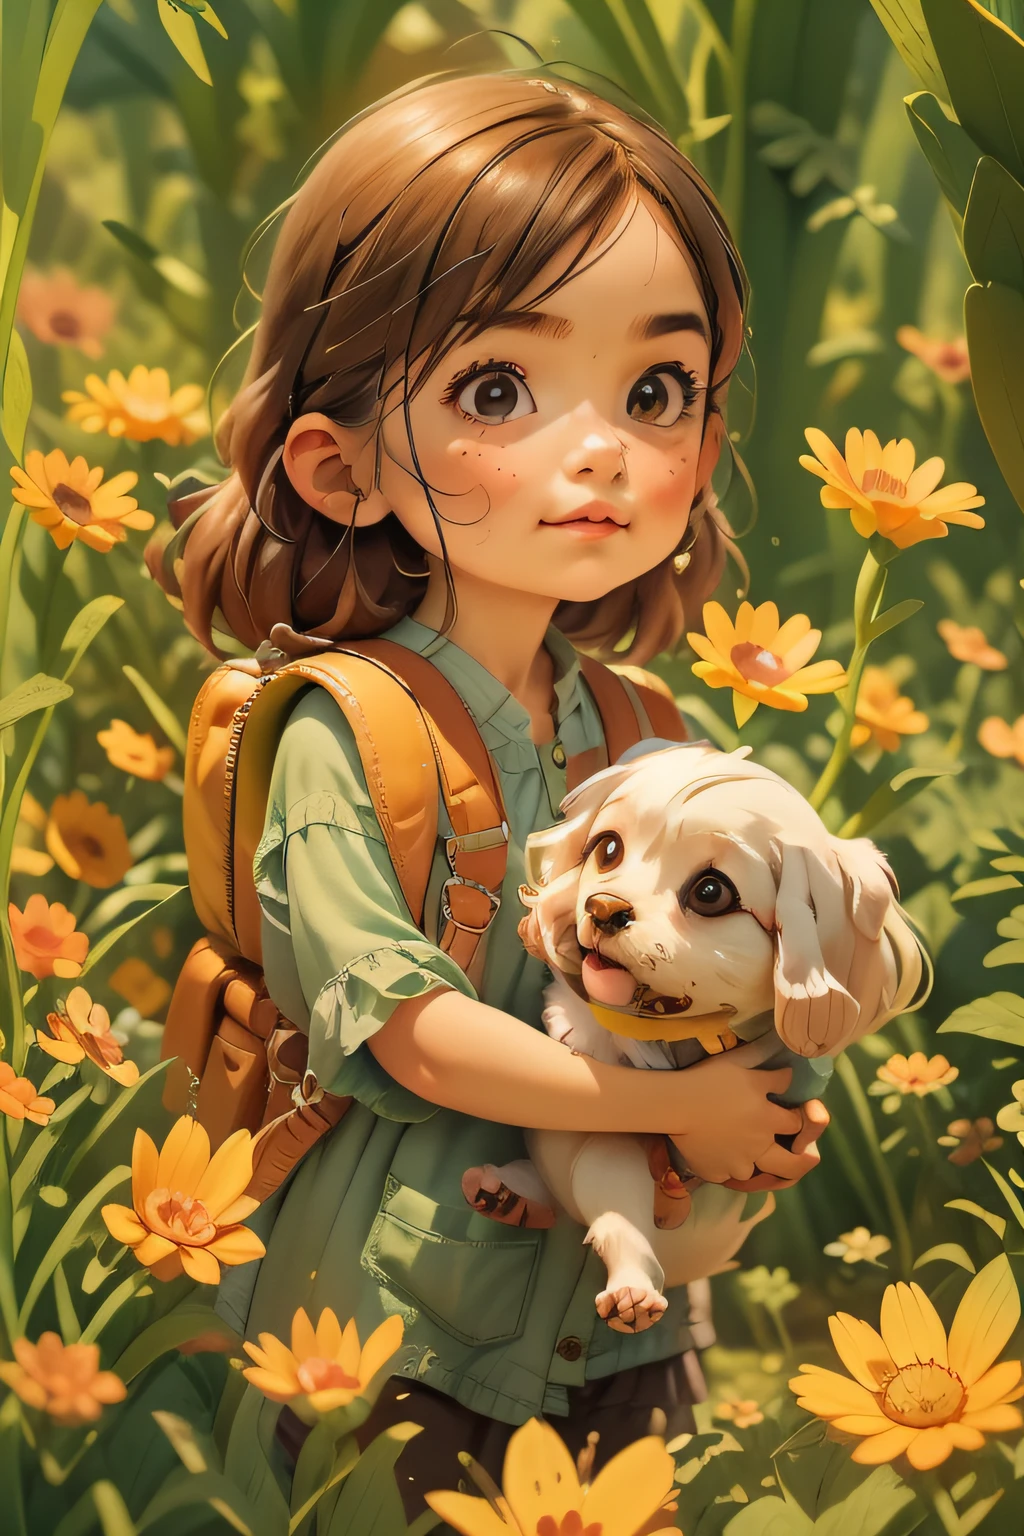 A very charming  with a backpack and her cute little dog enjoying a lovely spring outing surrounded by beautiful yellow flowers and nature. The illustration is a high-definition illustration in 4K resolution with highly detailed facial features and cartoon-style visuals.